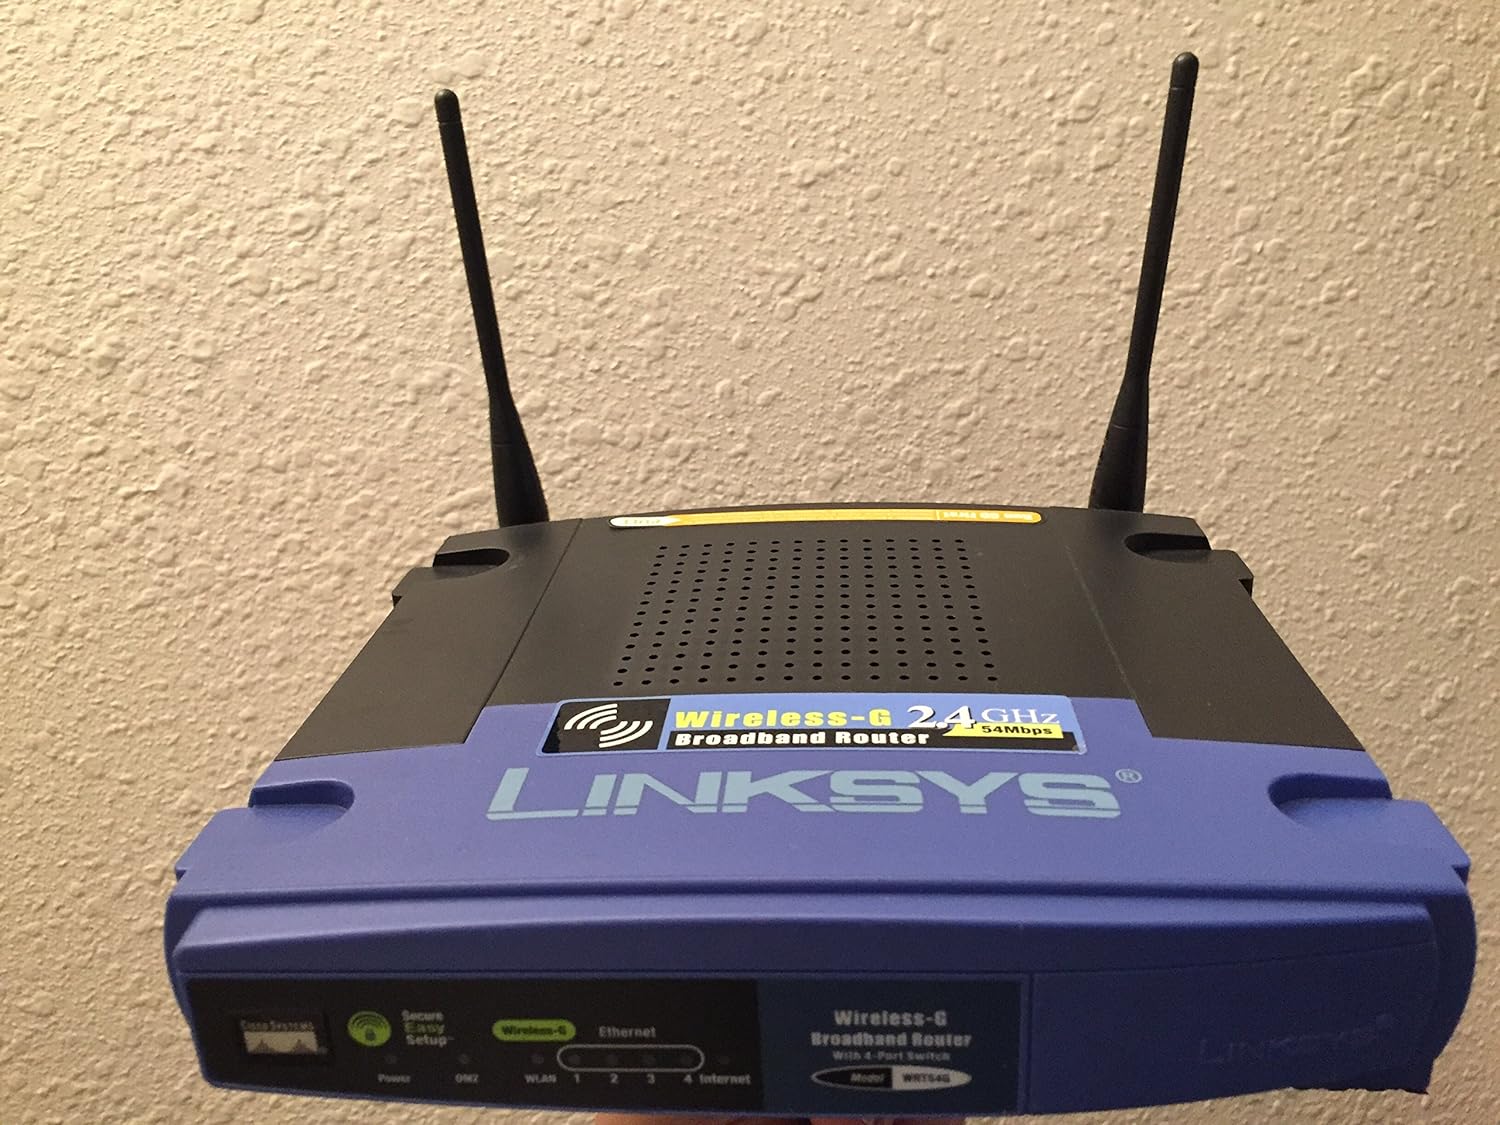 Old, outdated router